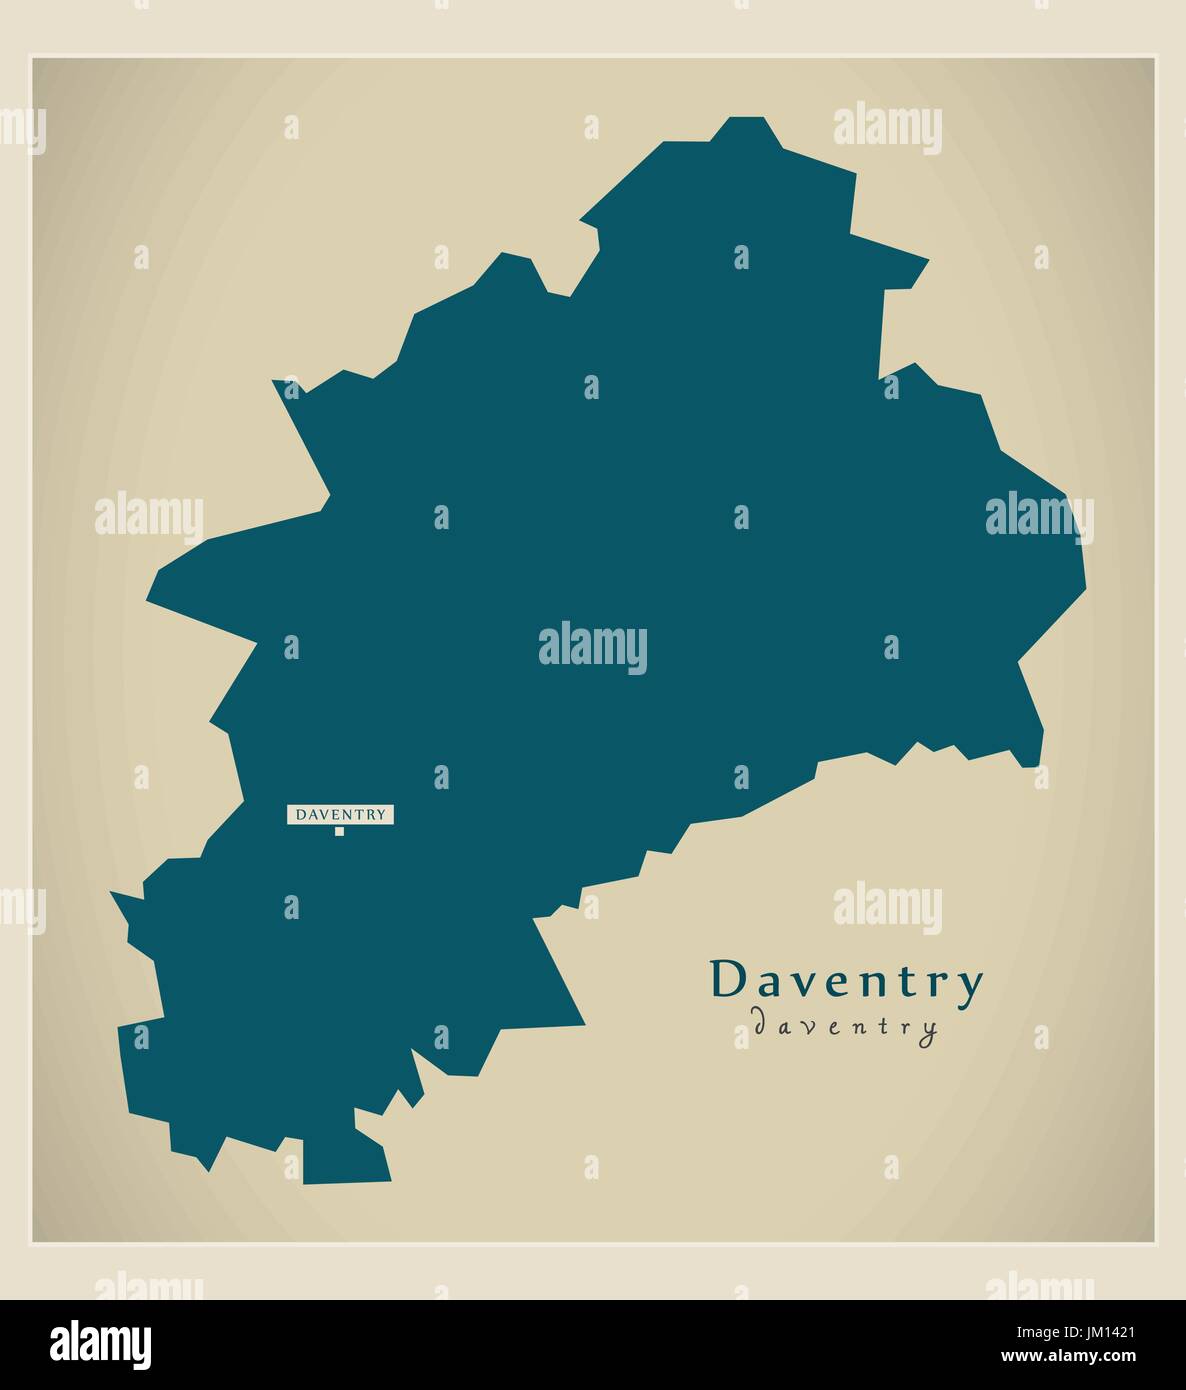 Modern Map - Daventry district of Northamptonshire England UK illustration Stock Vector